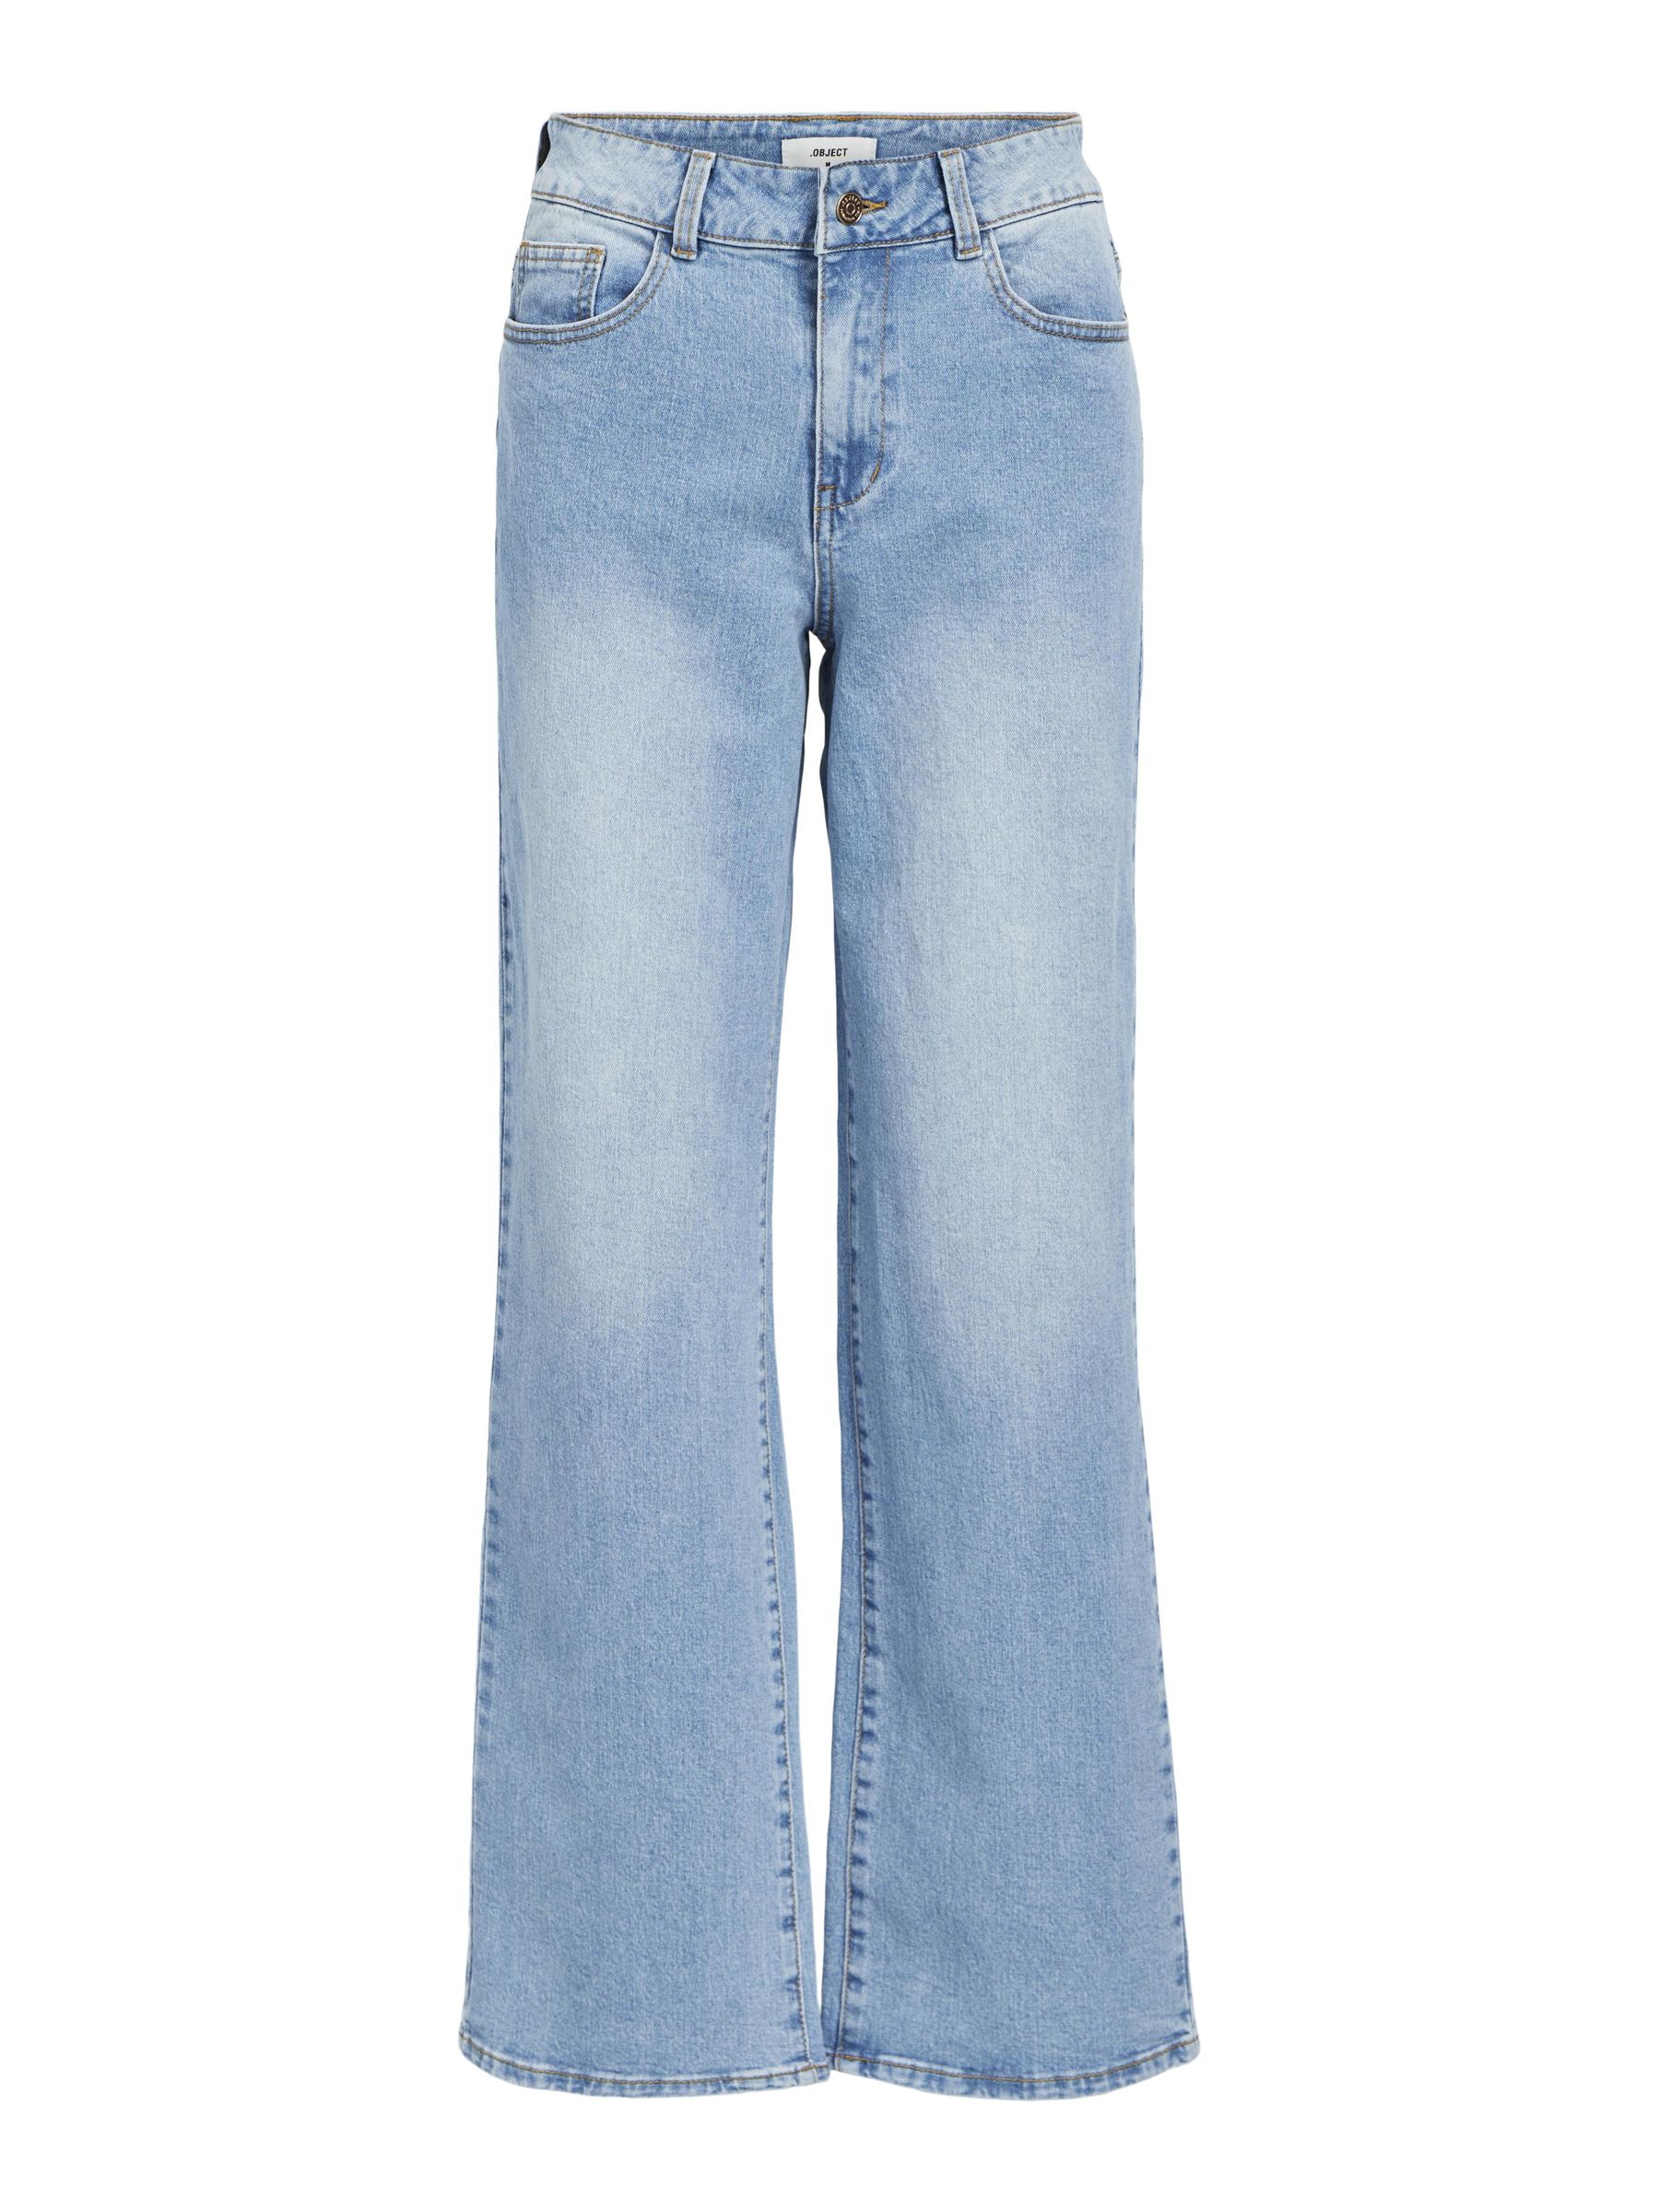 MID-WAIST WIDE FIT JEANS | Object Collectors